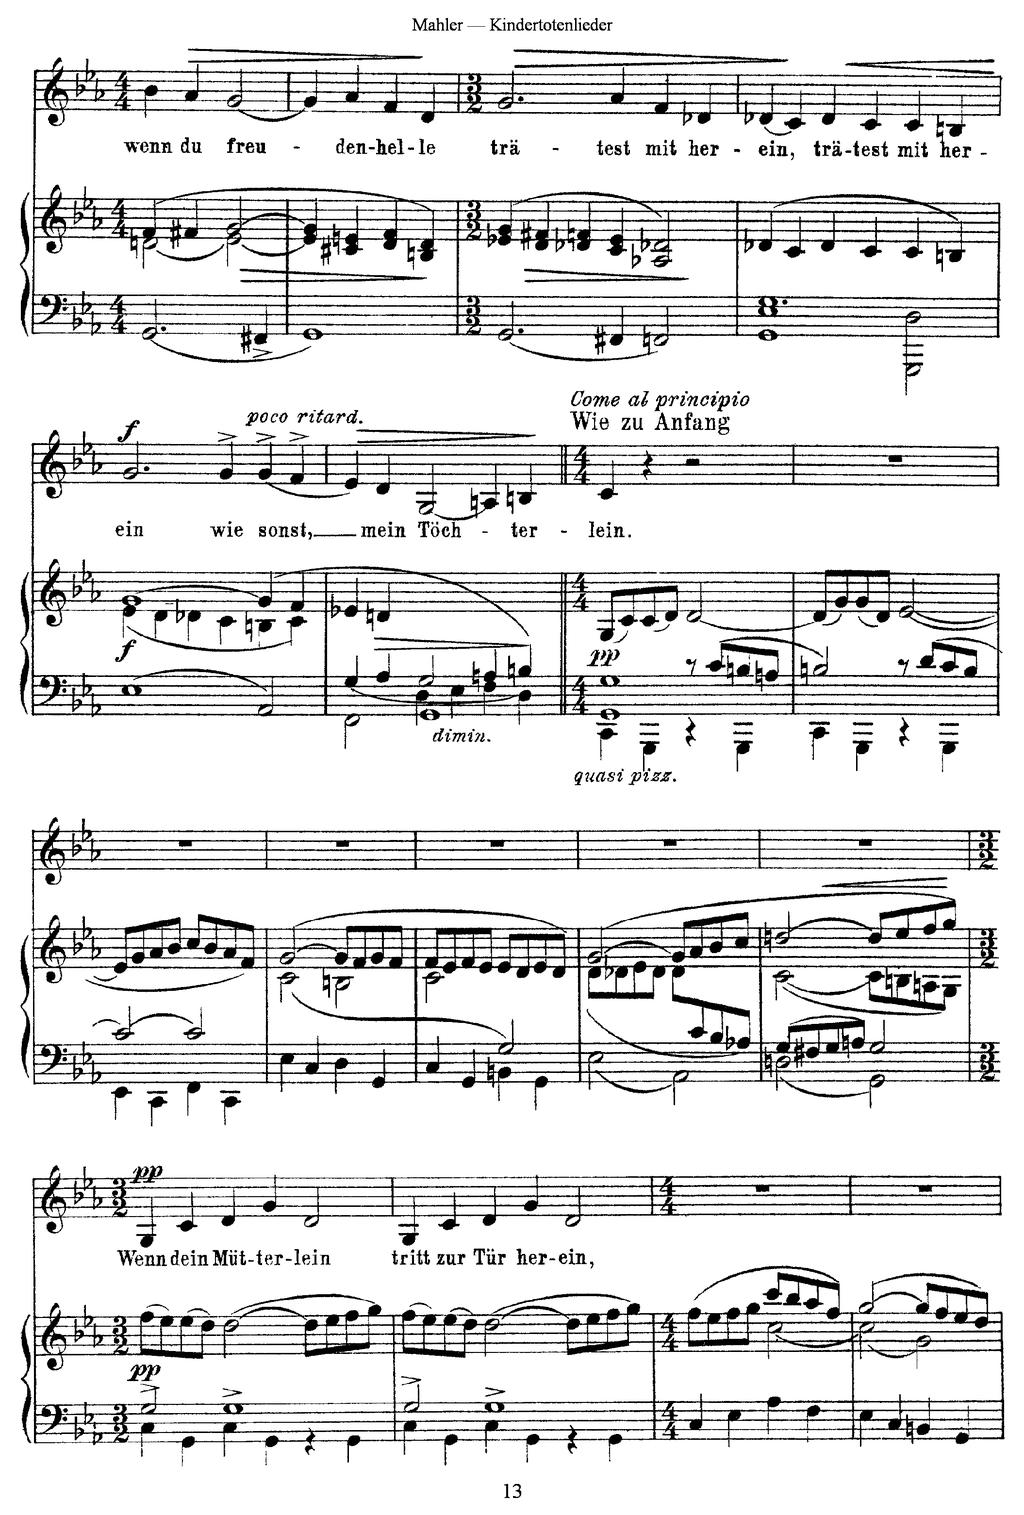 in orchestration, but the incomplete neighbor tones and the vocal leap of the sixth are the same. Figure 14. Mm. 27-33, third movement. Source: Mahler, Kindertotenlieder, 13.